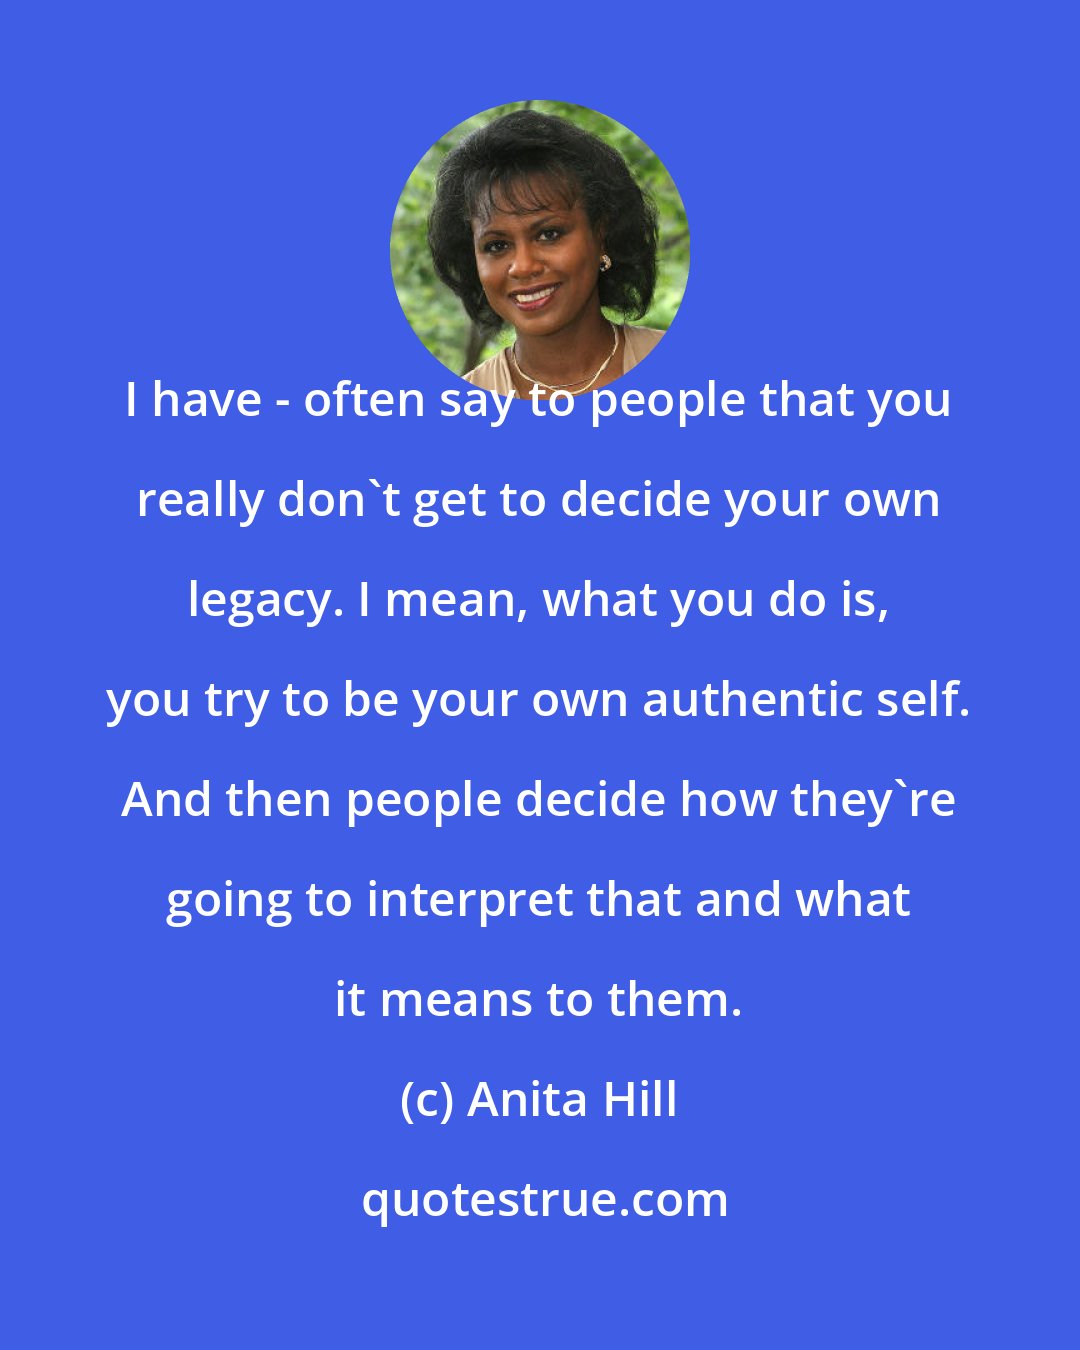 Anita Hill: I have - often say to people that you really don't get to decide your own legacy. I mean, what you do is, you try to be your own authentic self. And then people decide how they're going to interpret that and what it means to them.